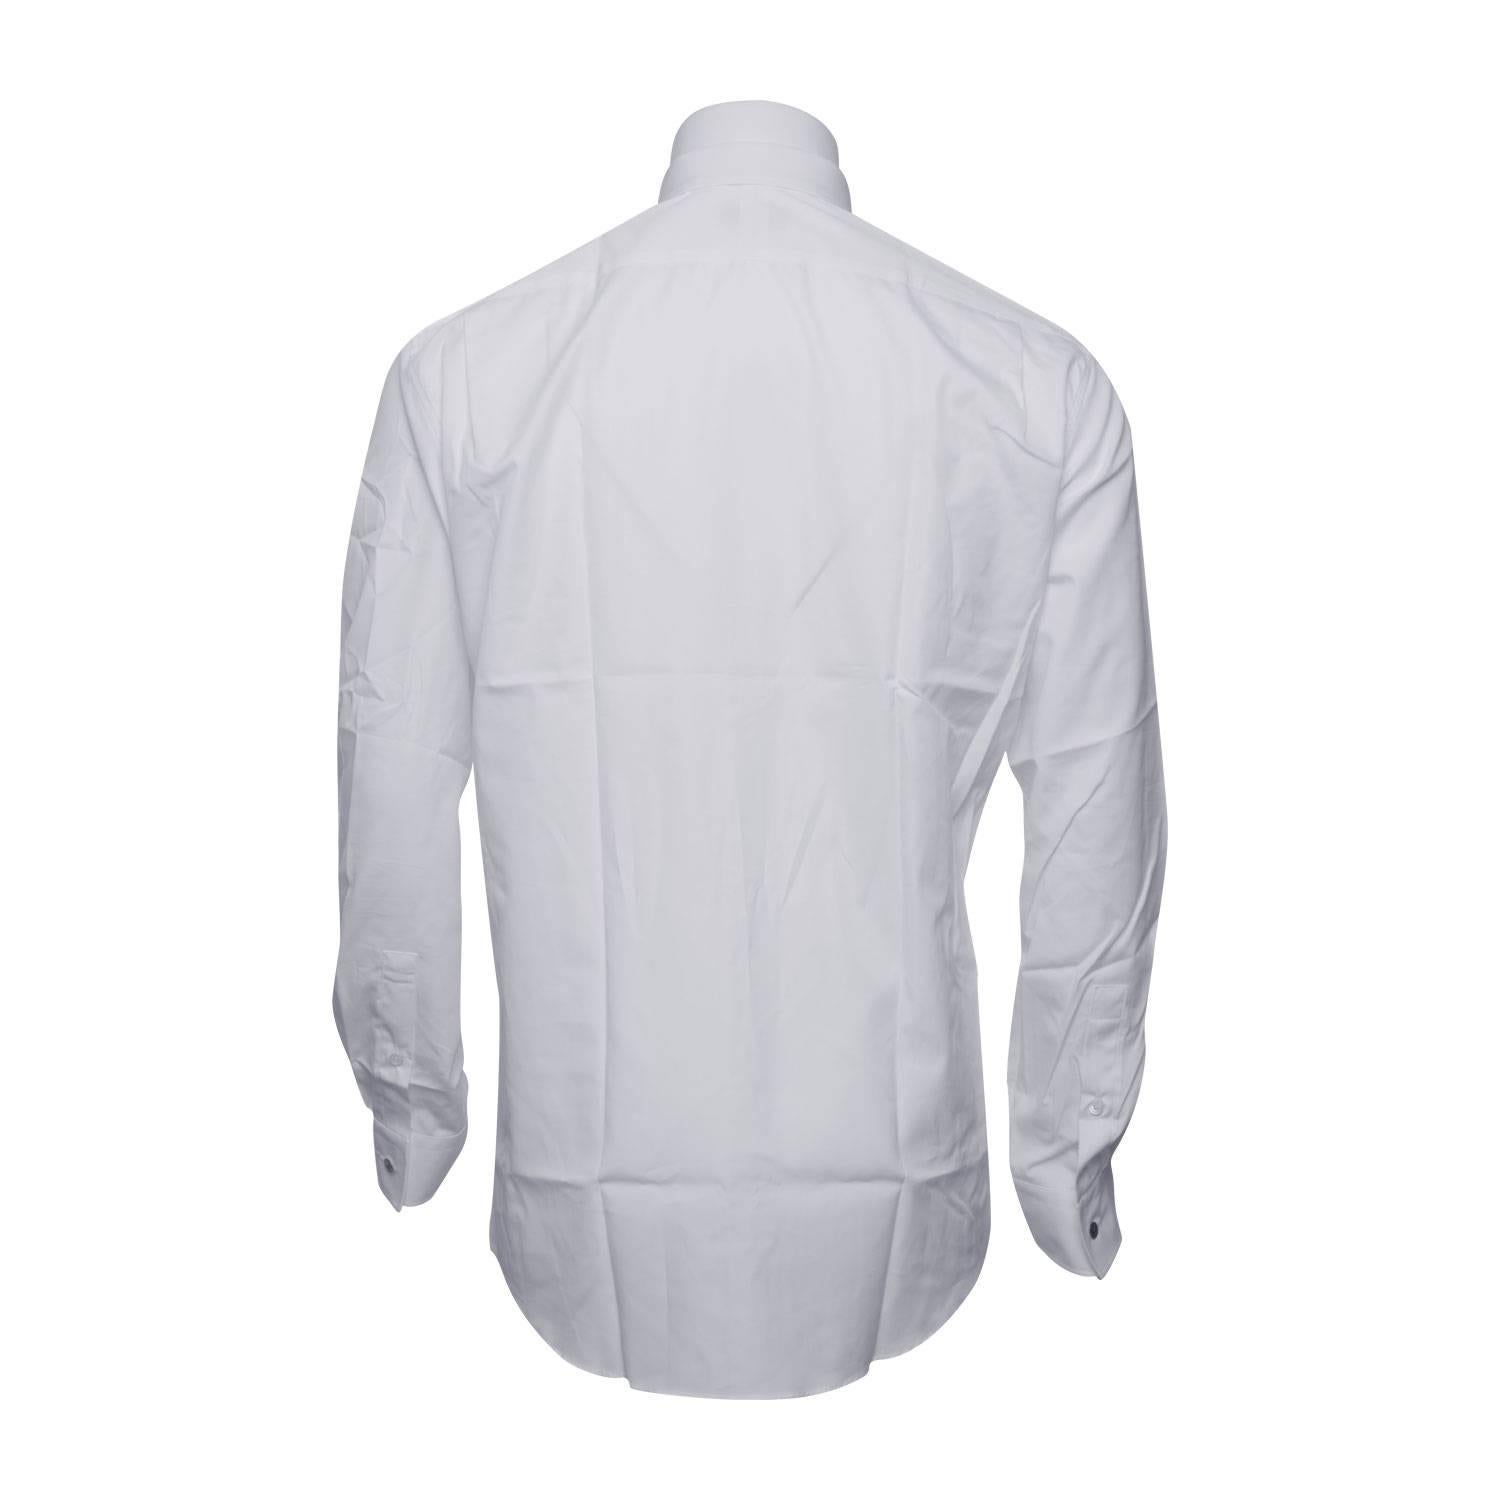 Hermes Chemise Col Droit Popeline de Cotton Unie Size 43 Color Blanc 2016.

Pre-owned and never used.

Bought it in hermes store in 2016.

Size; 43.

Composition: Cotton.

Color; White.

Model; Chemise Col Droit Popeline.

Details: 
-